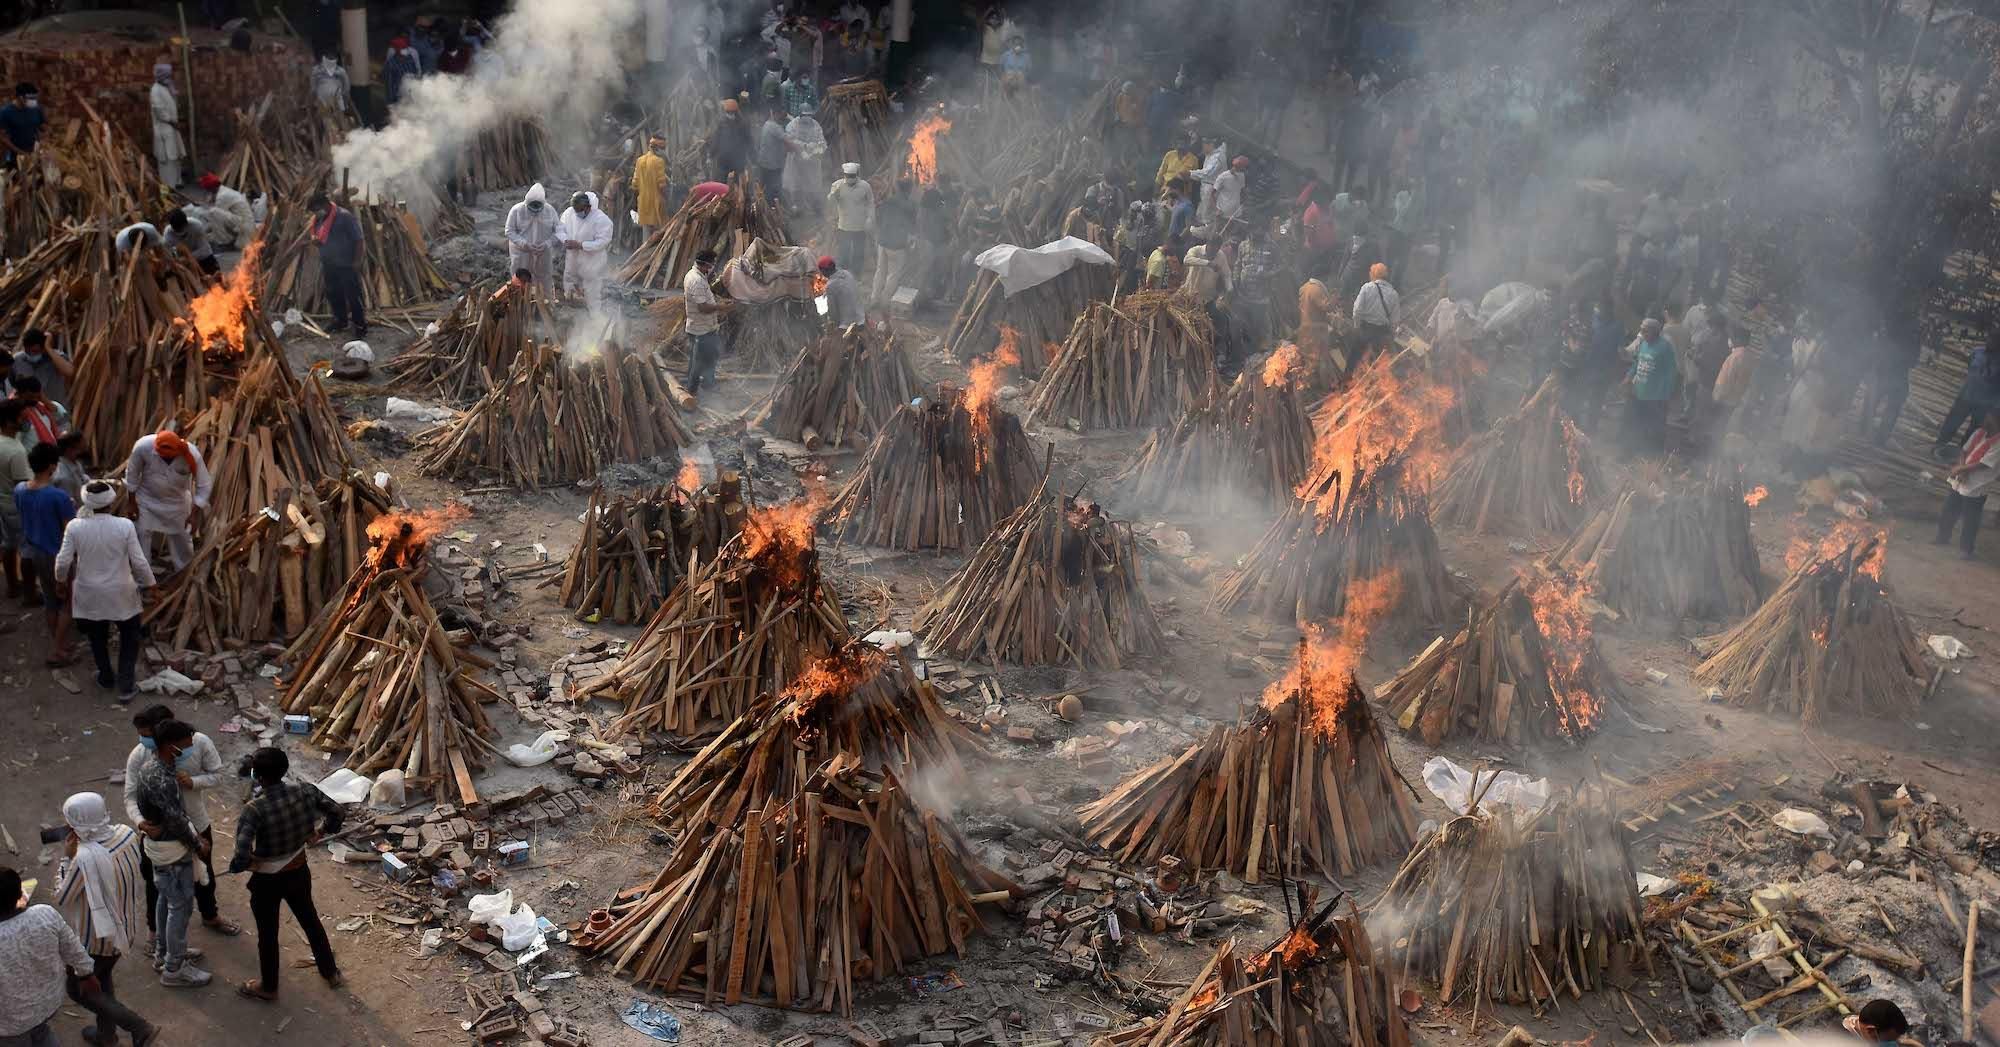 A view of mass cremation of Covid-19 victims at Gazipur crematorium on April 28, 2021 in New Delhi, India. 